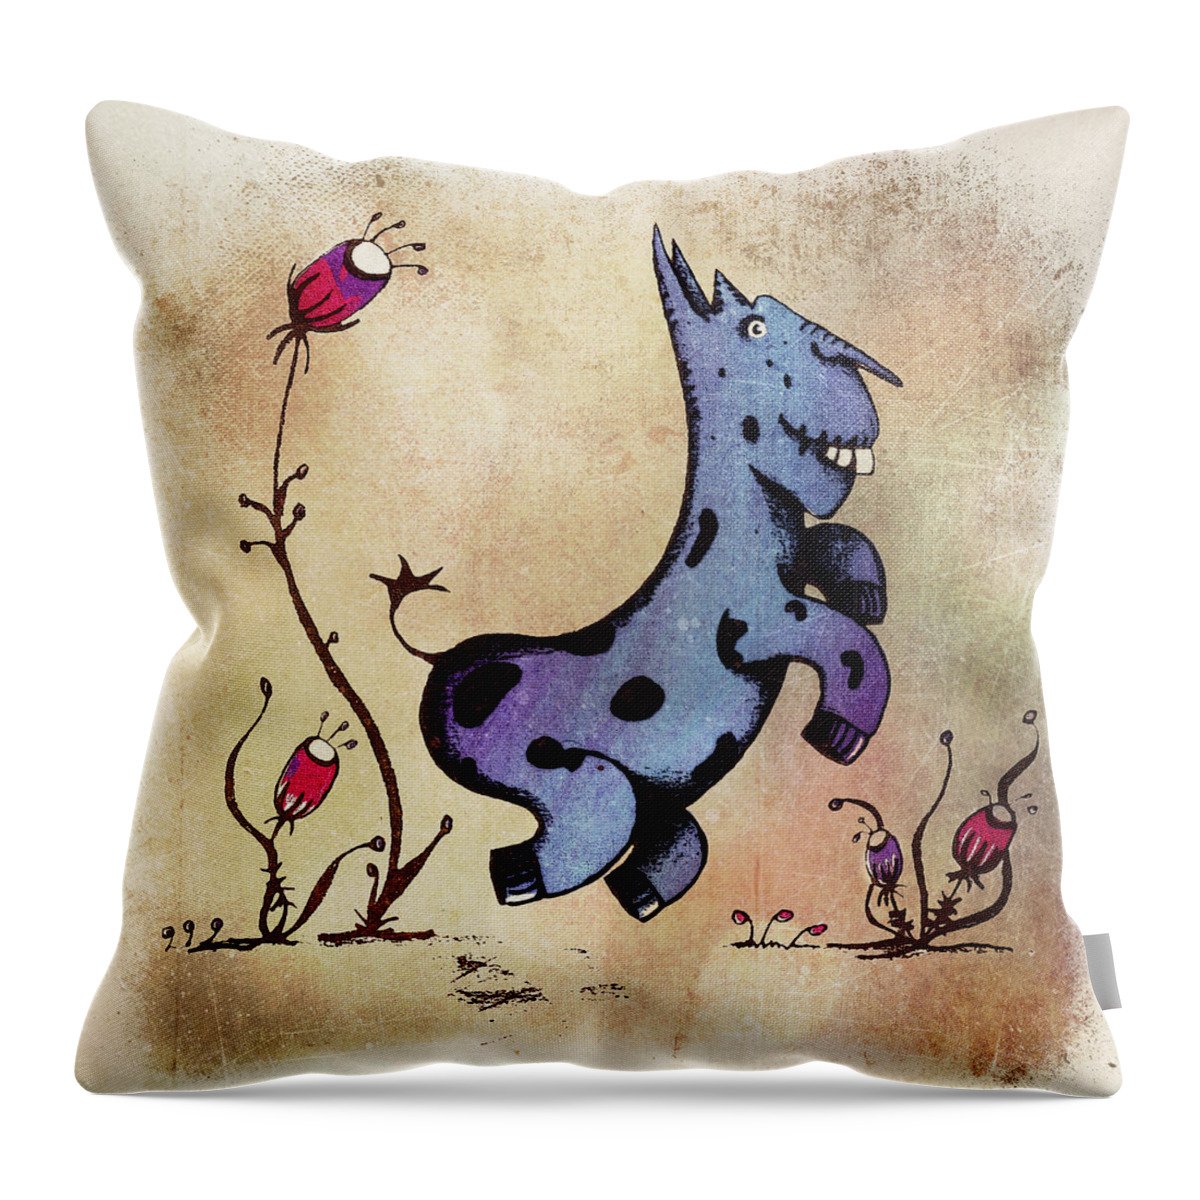 Donkey Throw Pillow featuring the drawing Dobo the Donkey by Lenny Carter